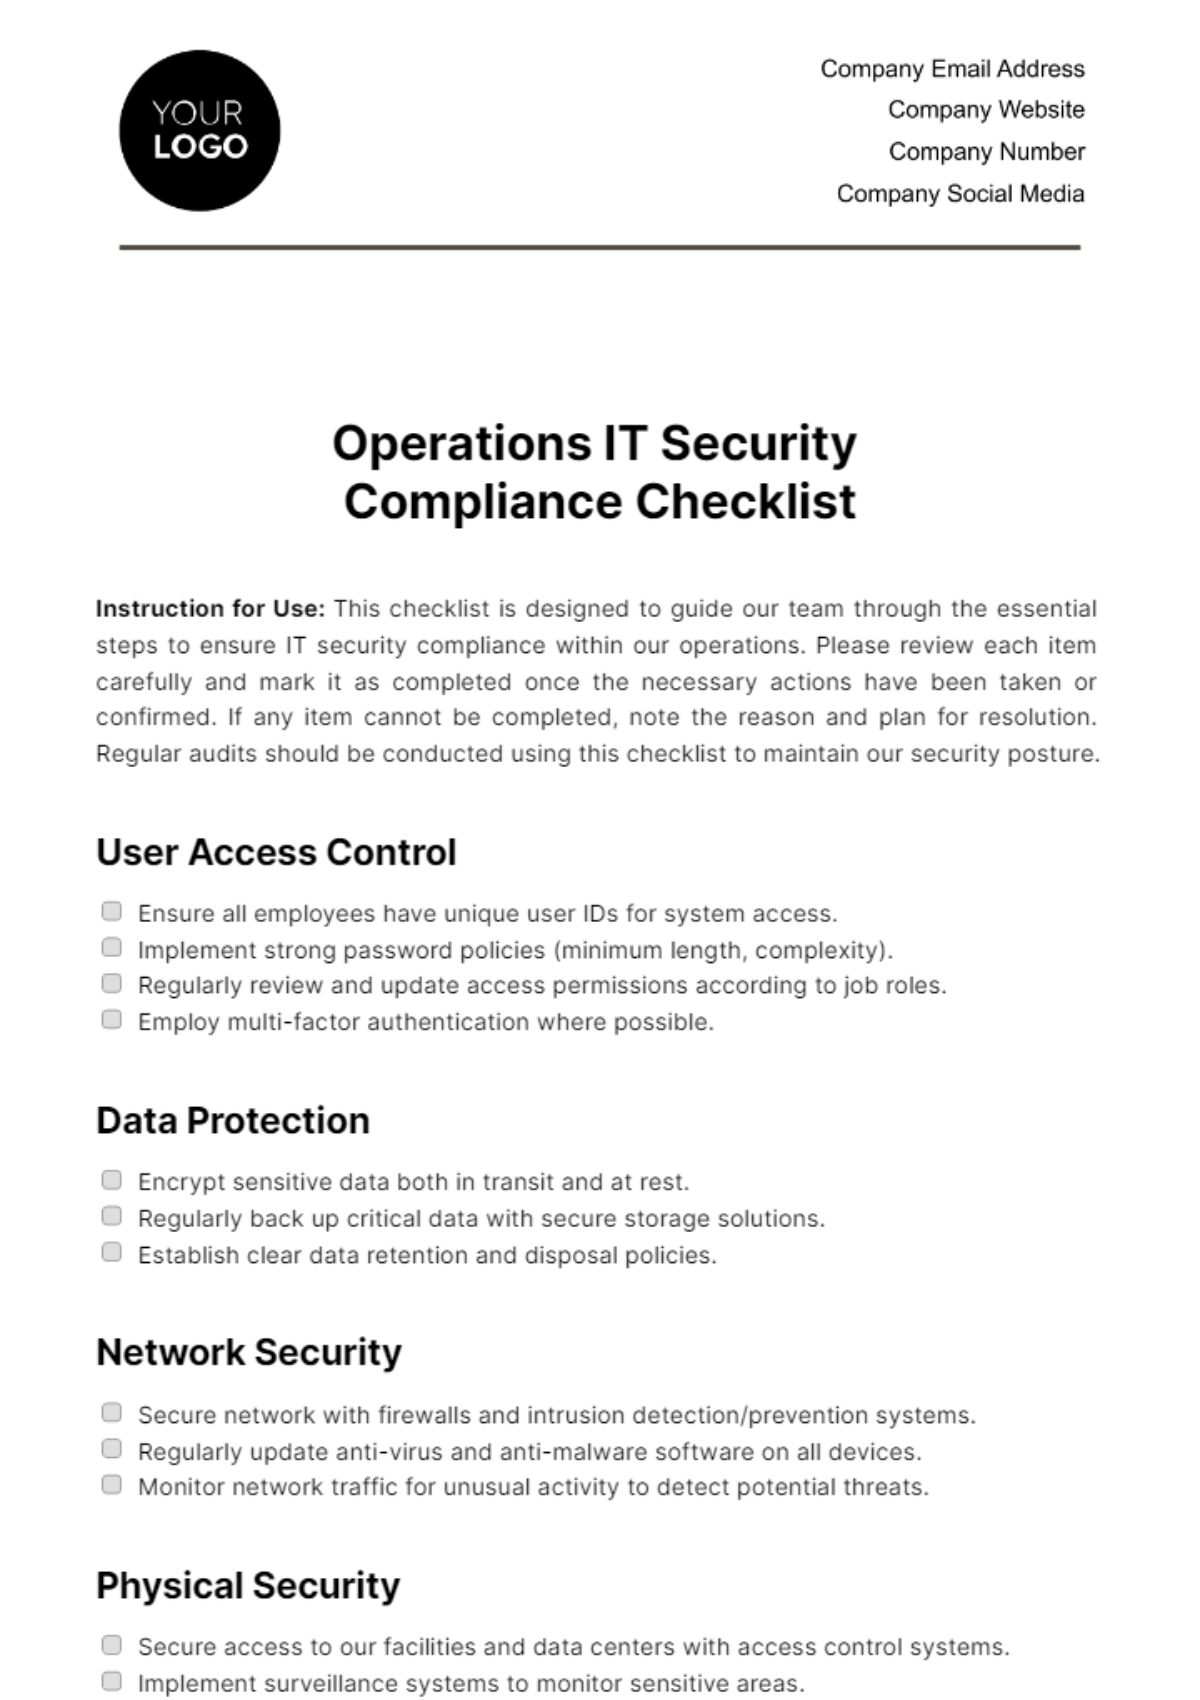 Free   Operations IT Security Compliance Checklist Template